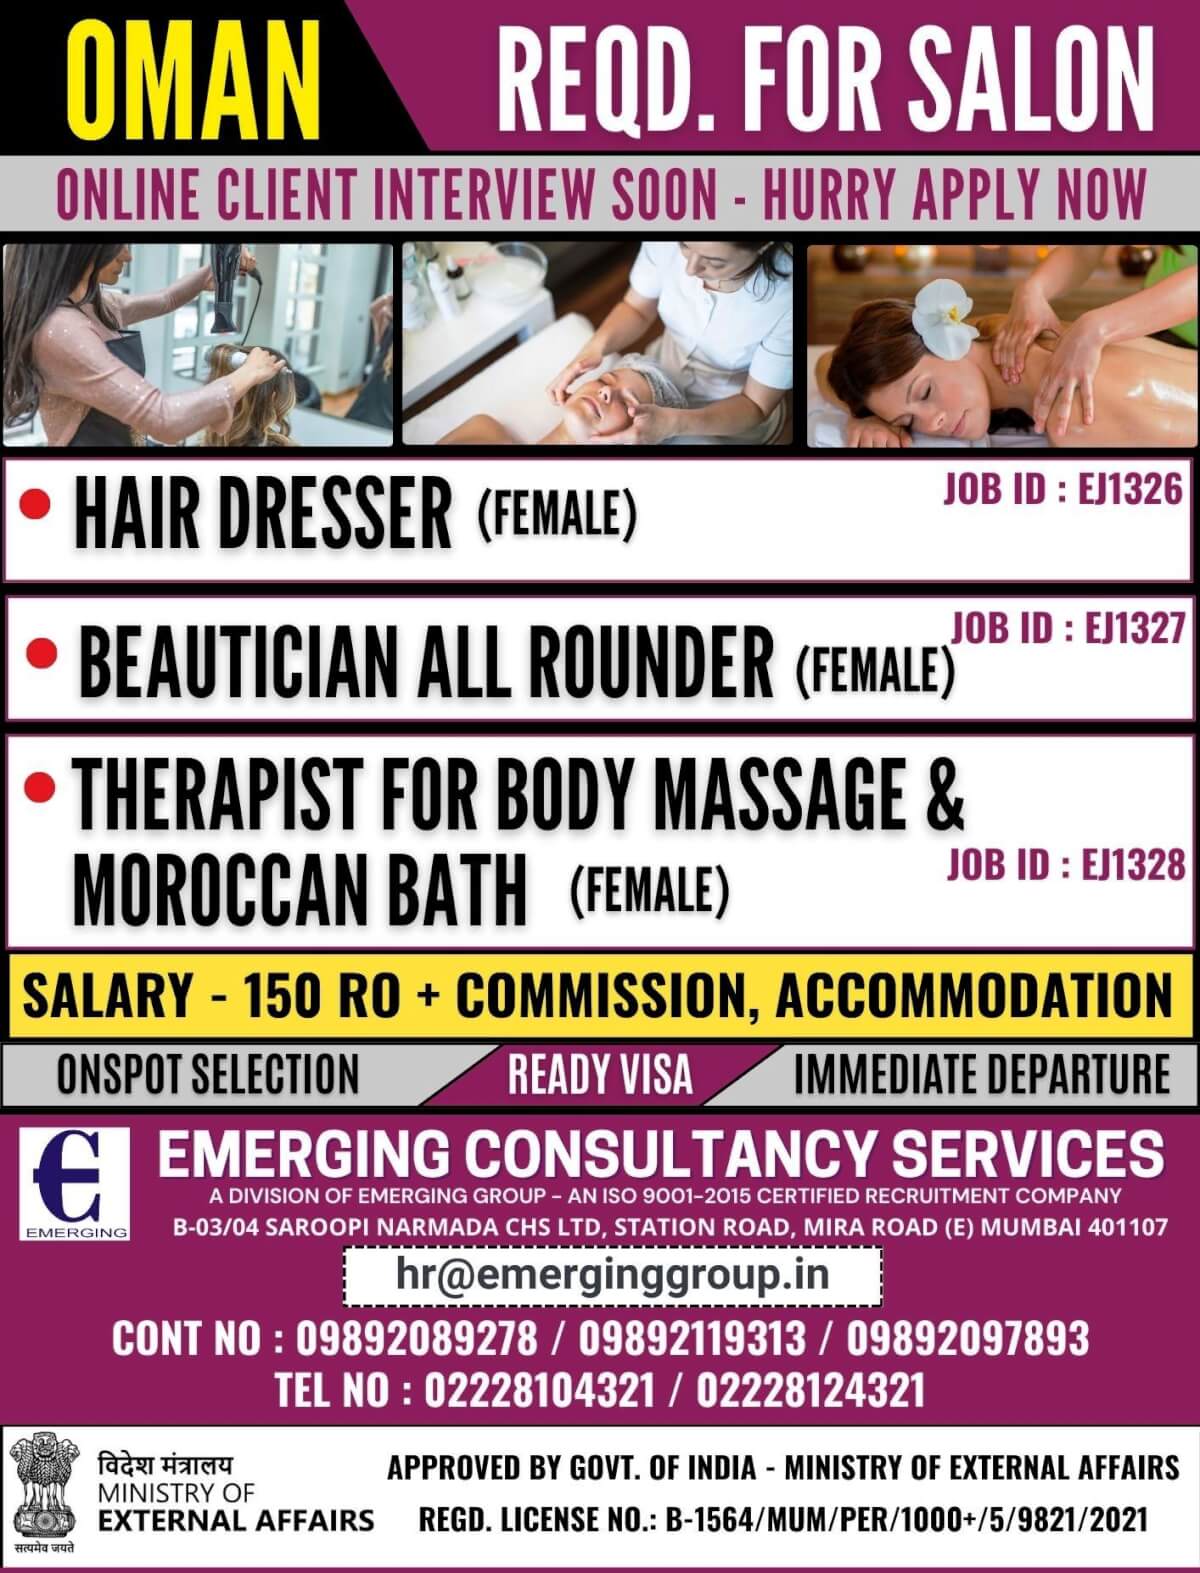 Urgently Required for SALON IN OMAN